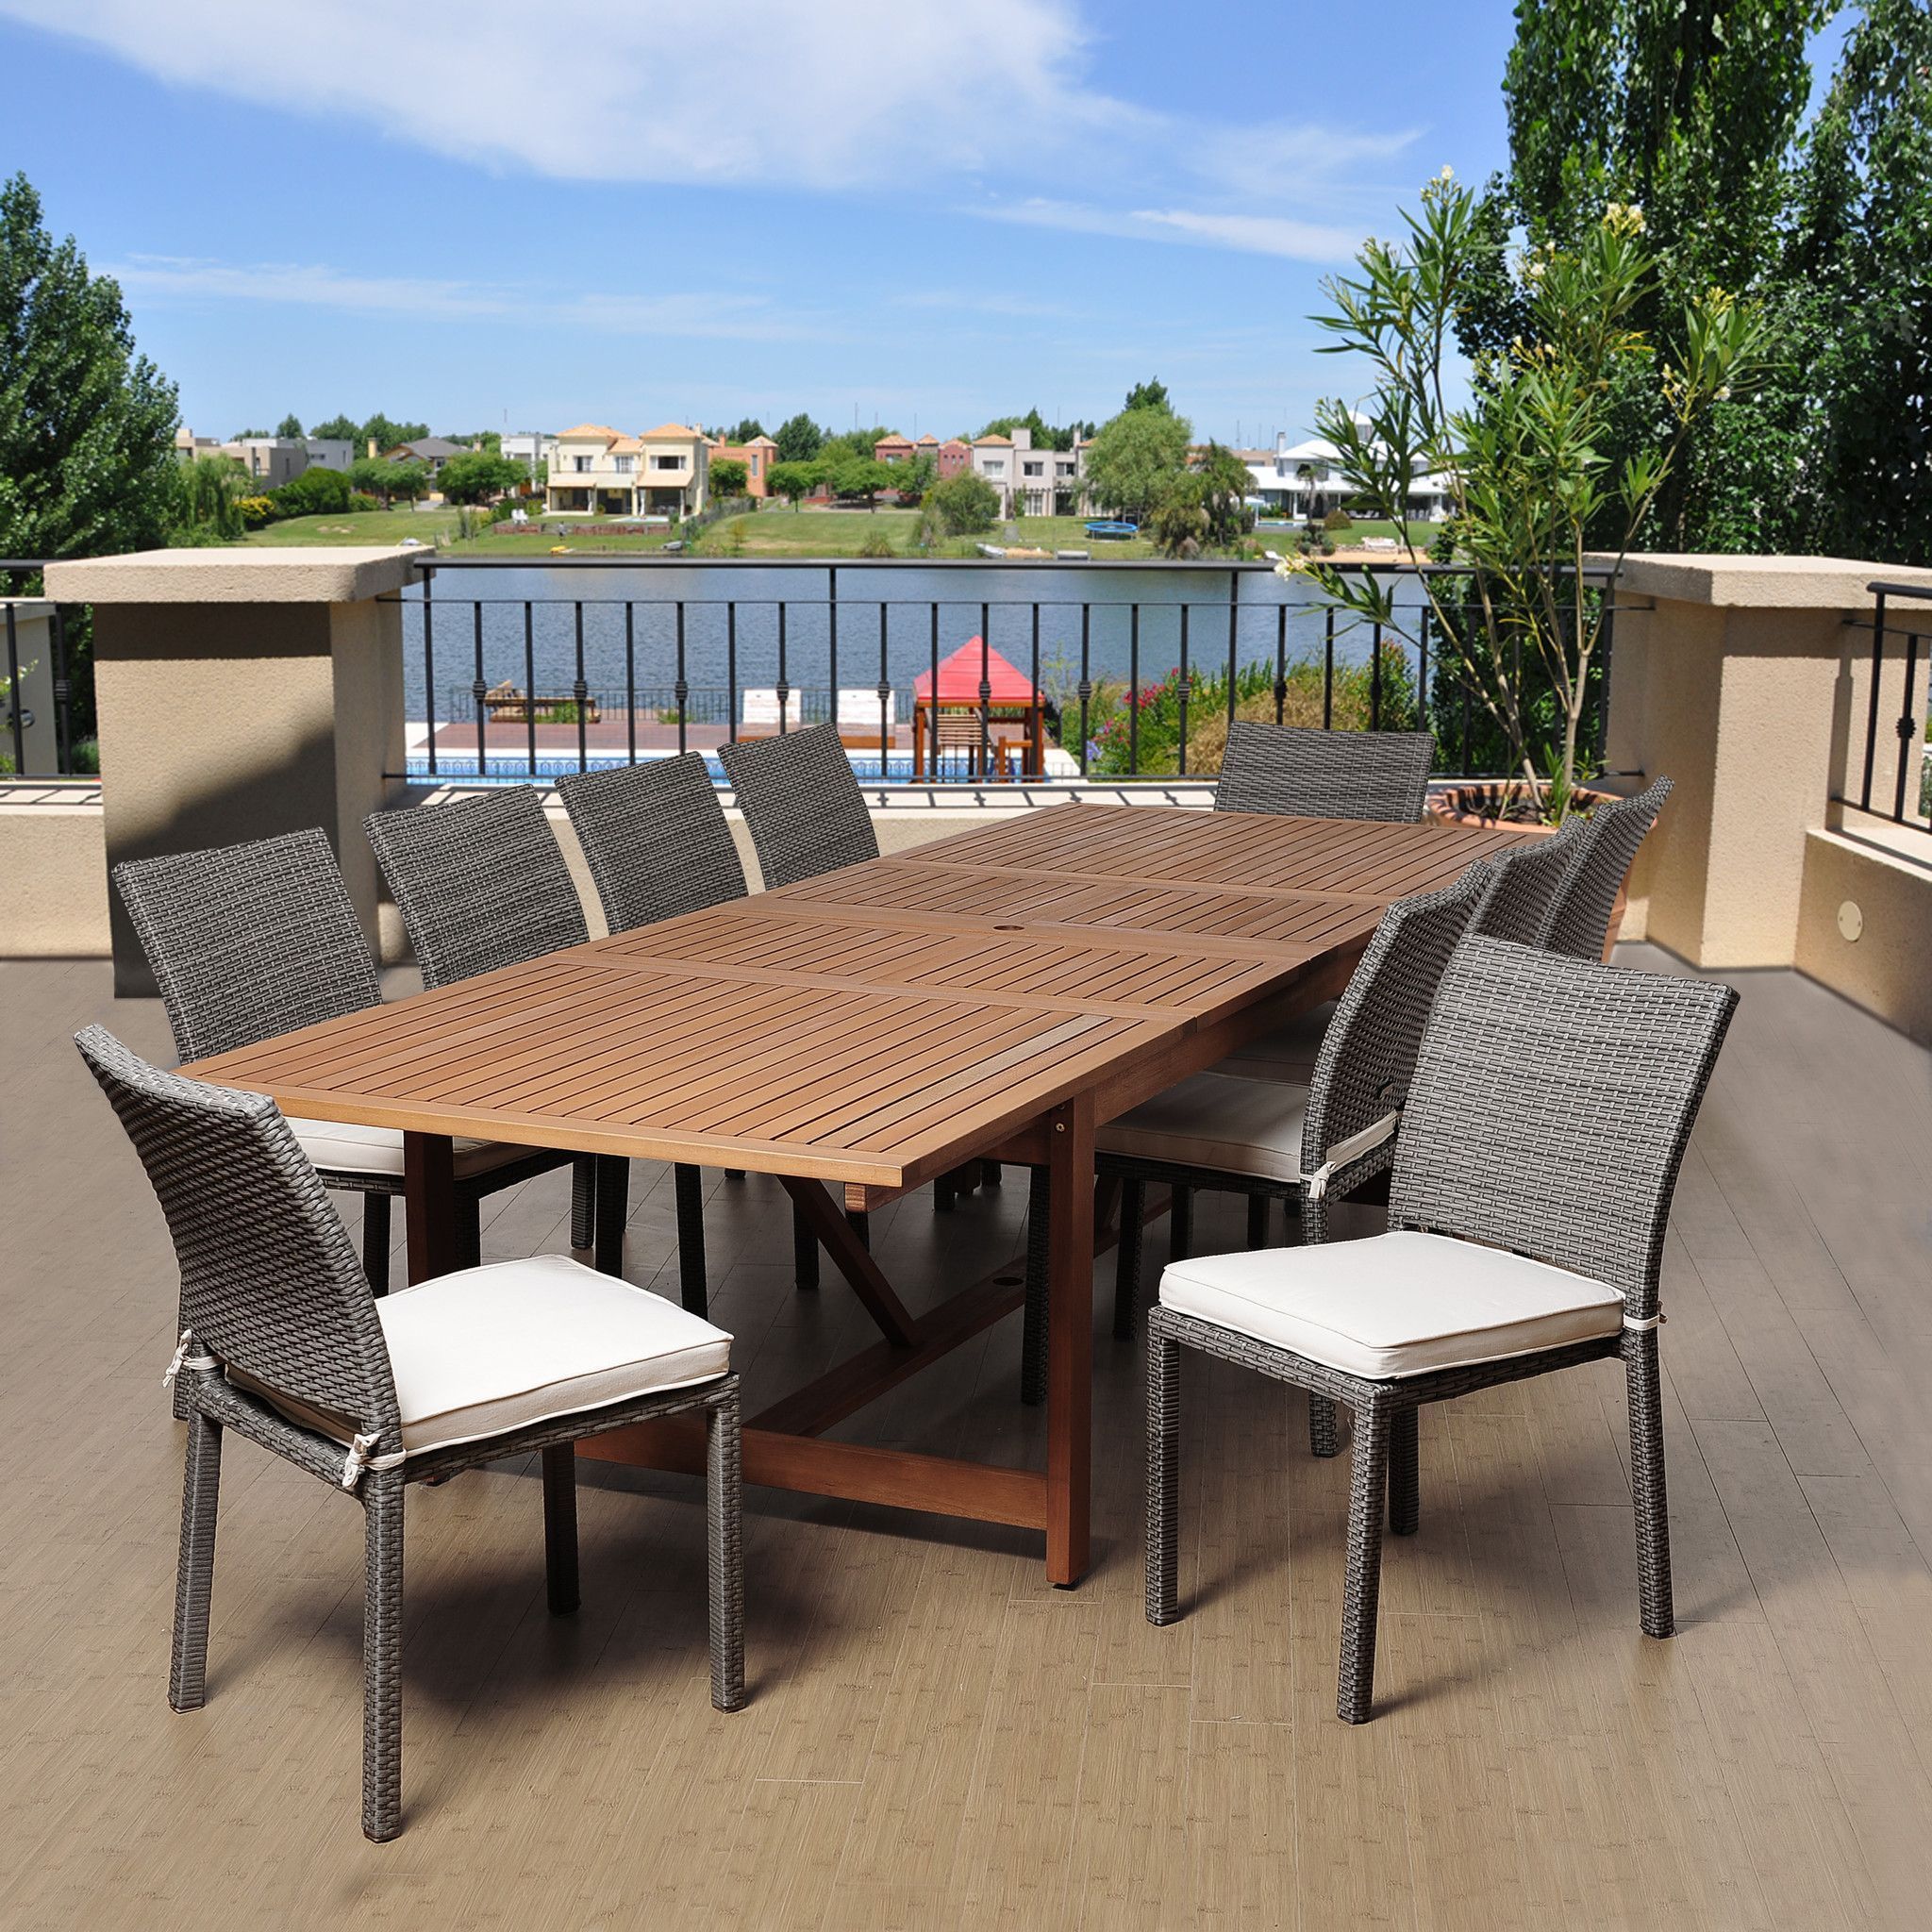 Angelo 11 Piece Eucalyptus/Wicker Extendable Rectangular Patio Dining In Extendable Patio Dining Set (View 2 of 15)